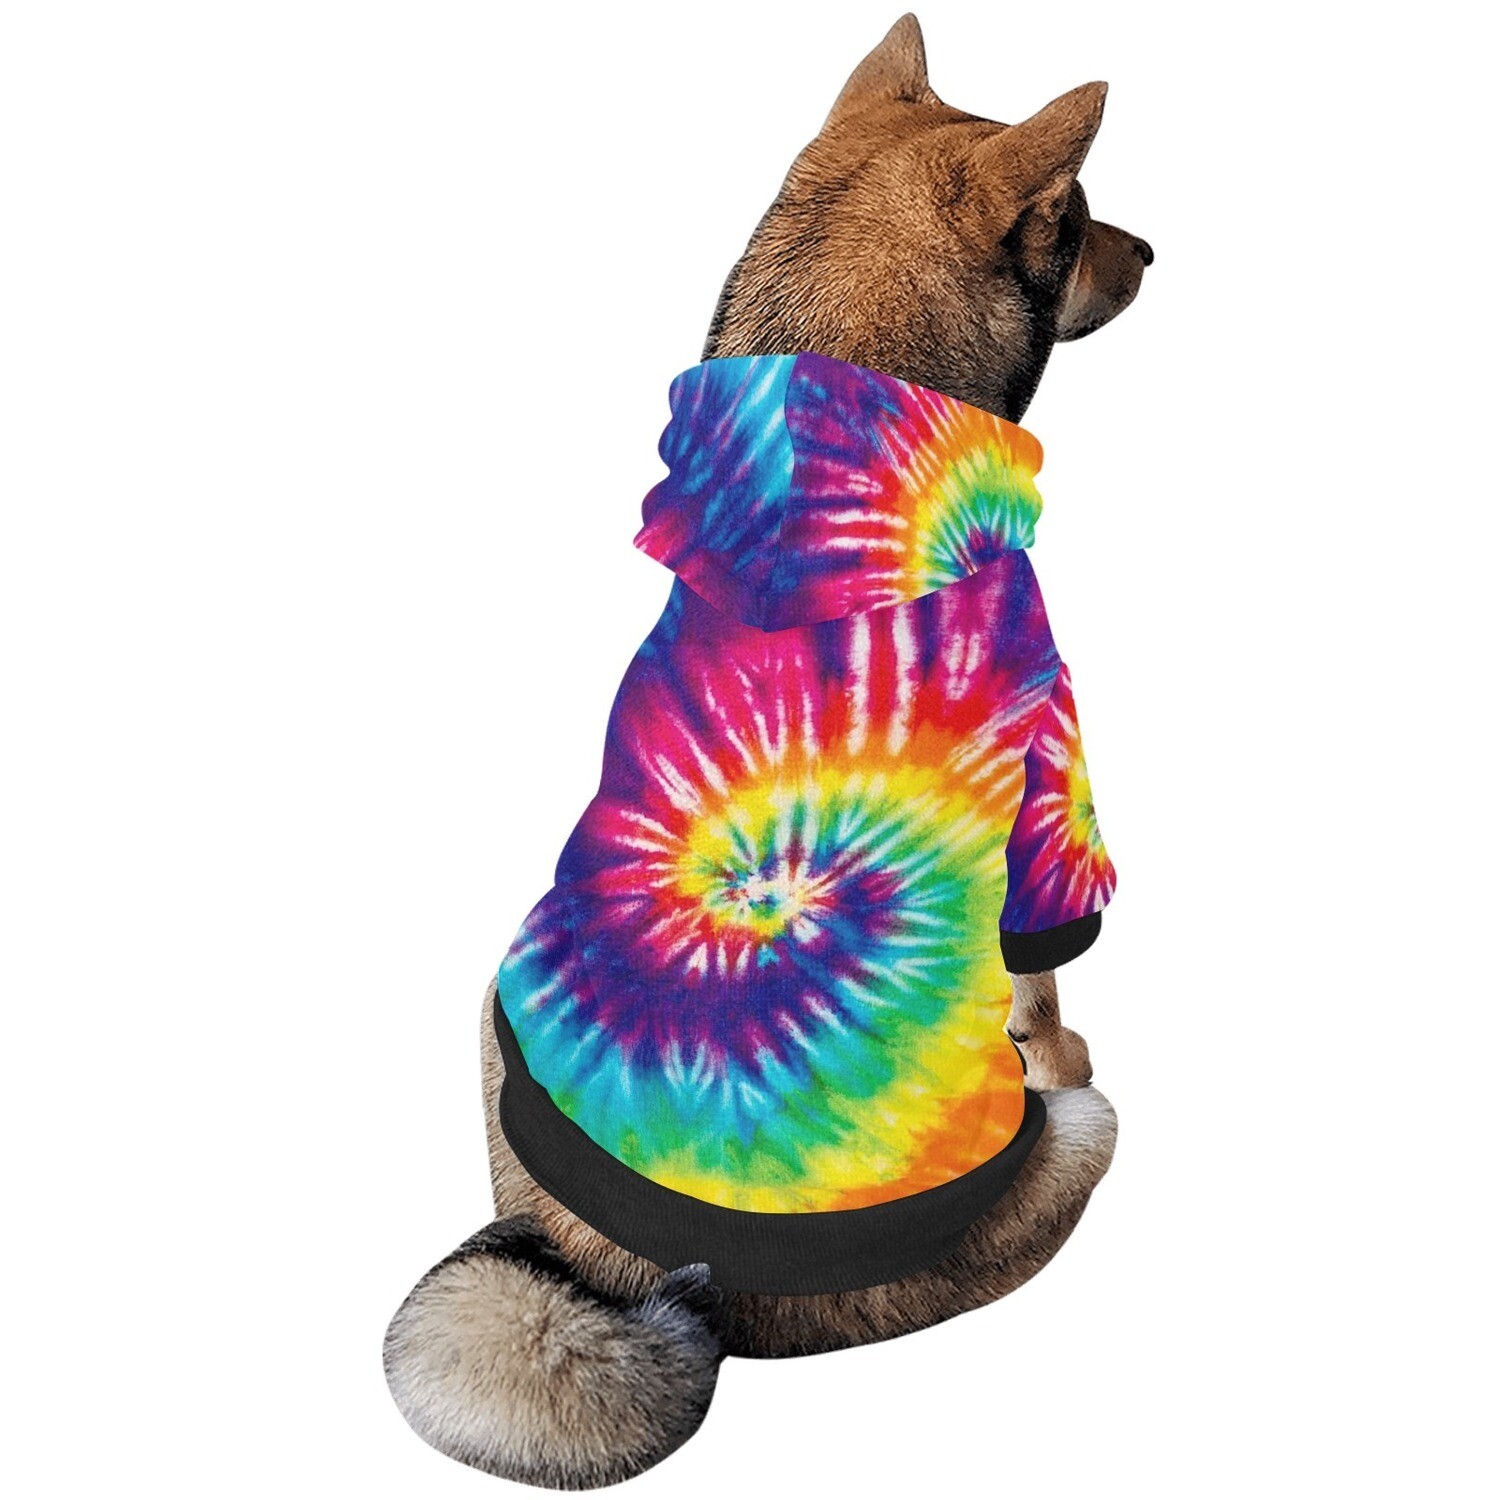 🐕☮︎ Dog Hoodie rainbow Tie dye, Hippie, dog Sweater, Dog clothes, Dog clothing, 6 sizes XS to 2XL, Gift for dogs